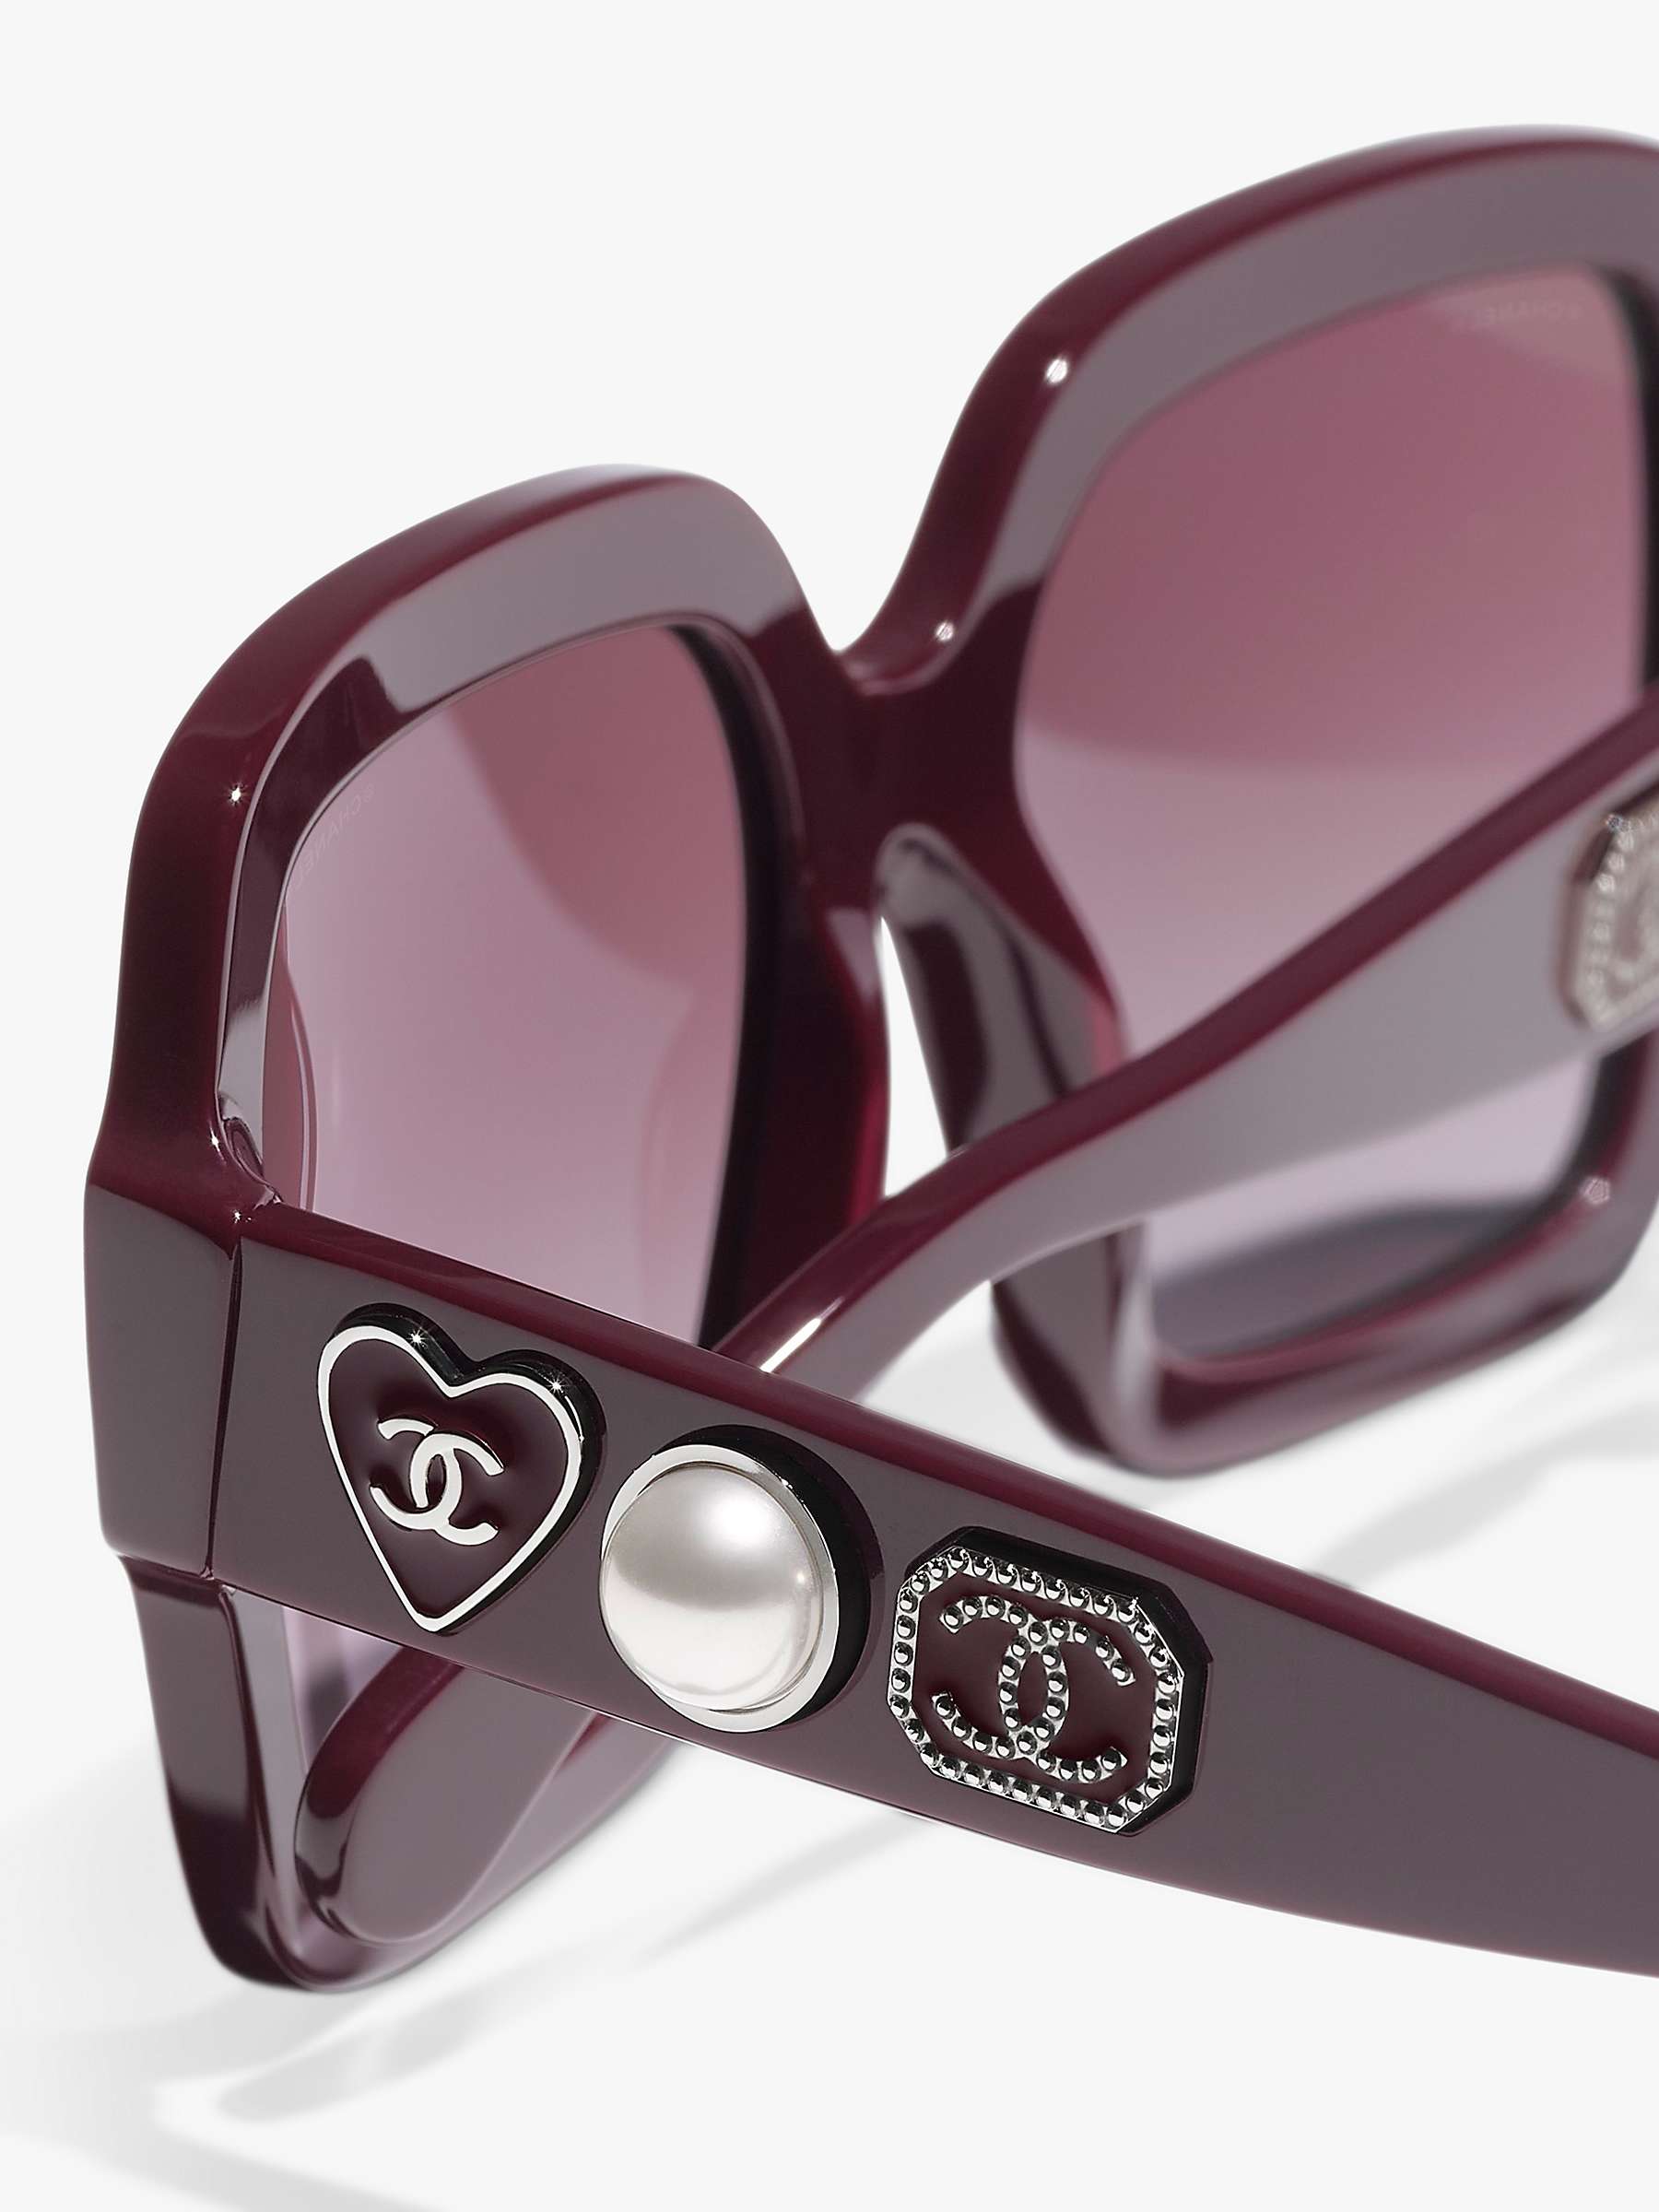 Buy CHANEL CH5479 Women's Square Sunglasses, Red Online at johnlewis.com